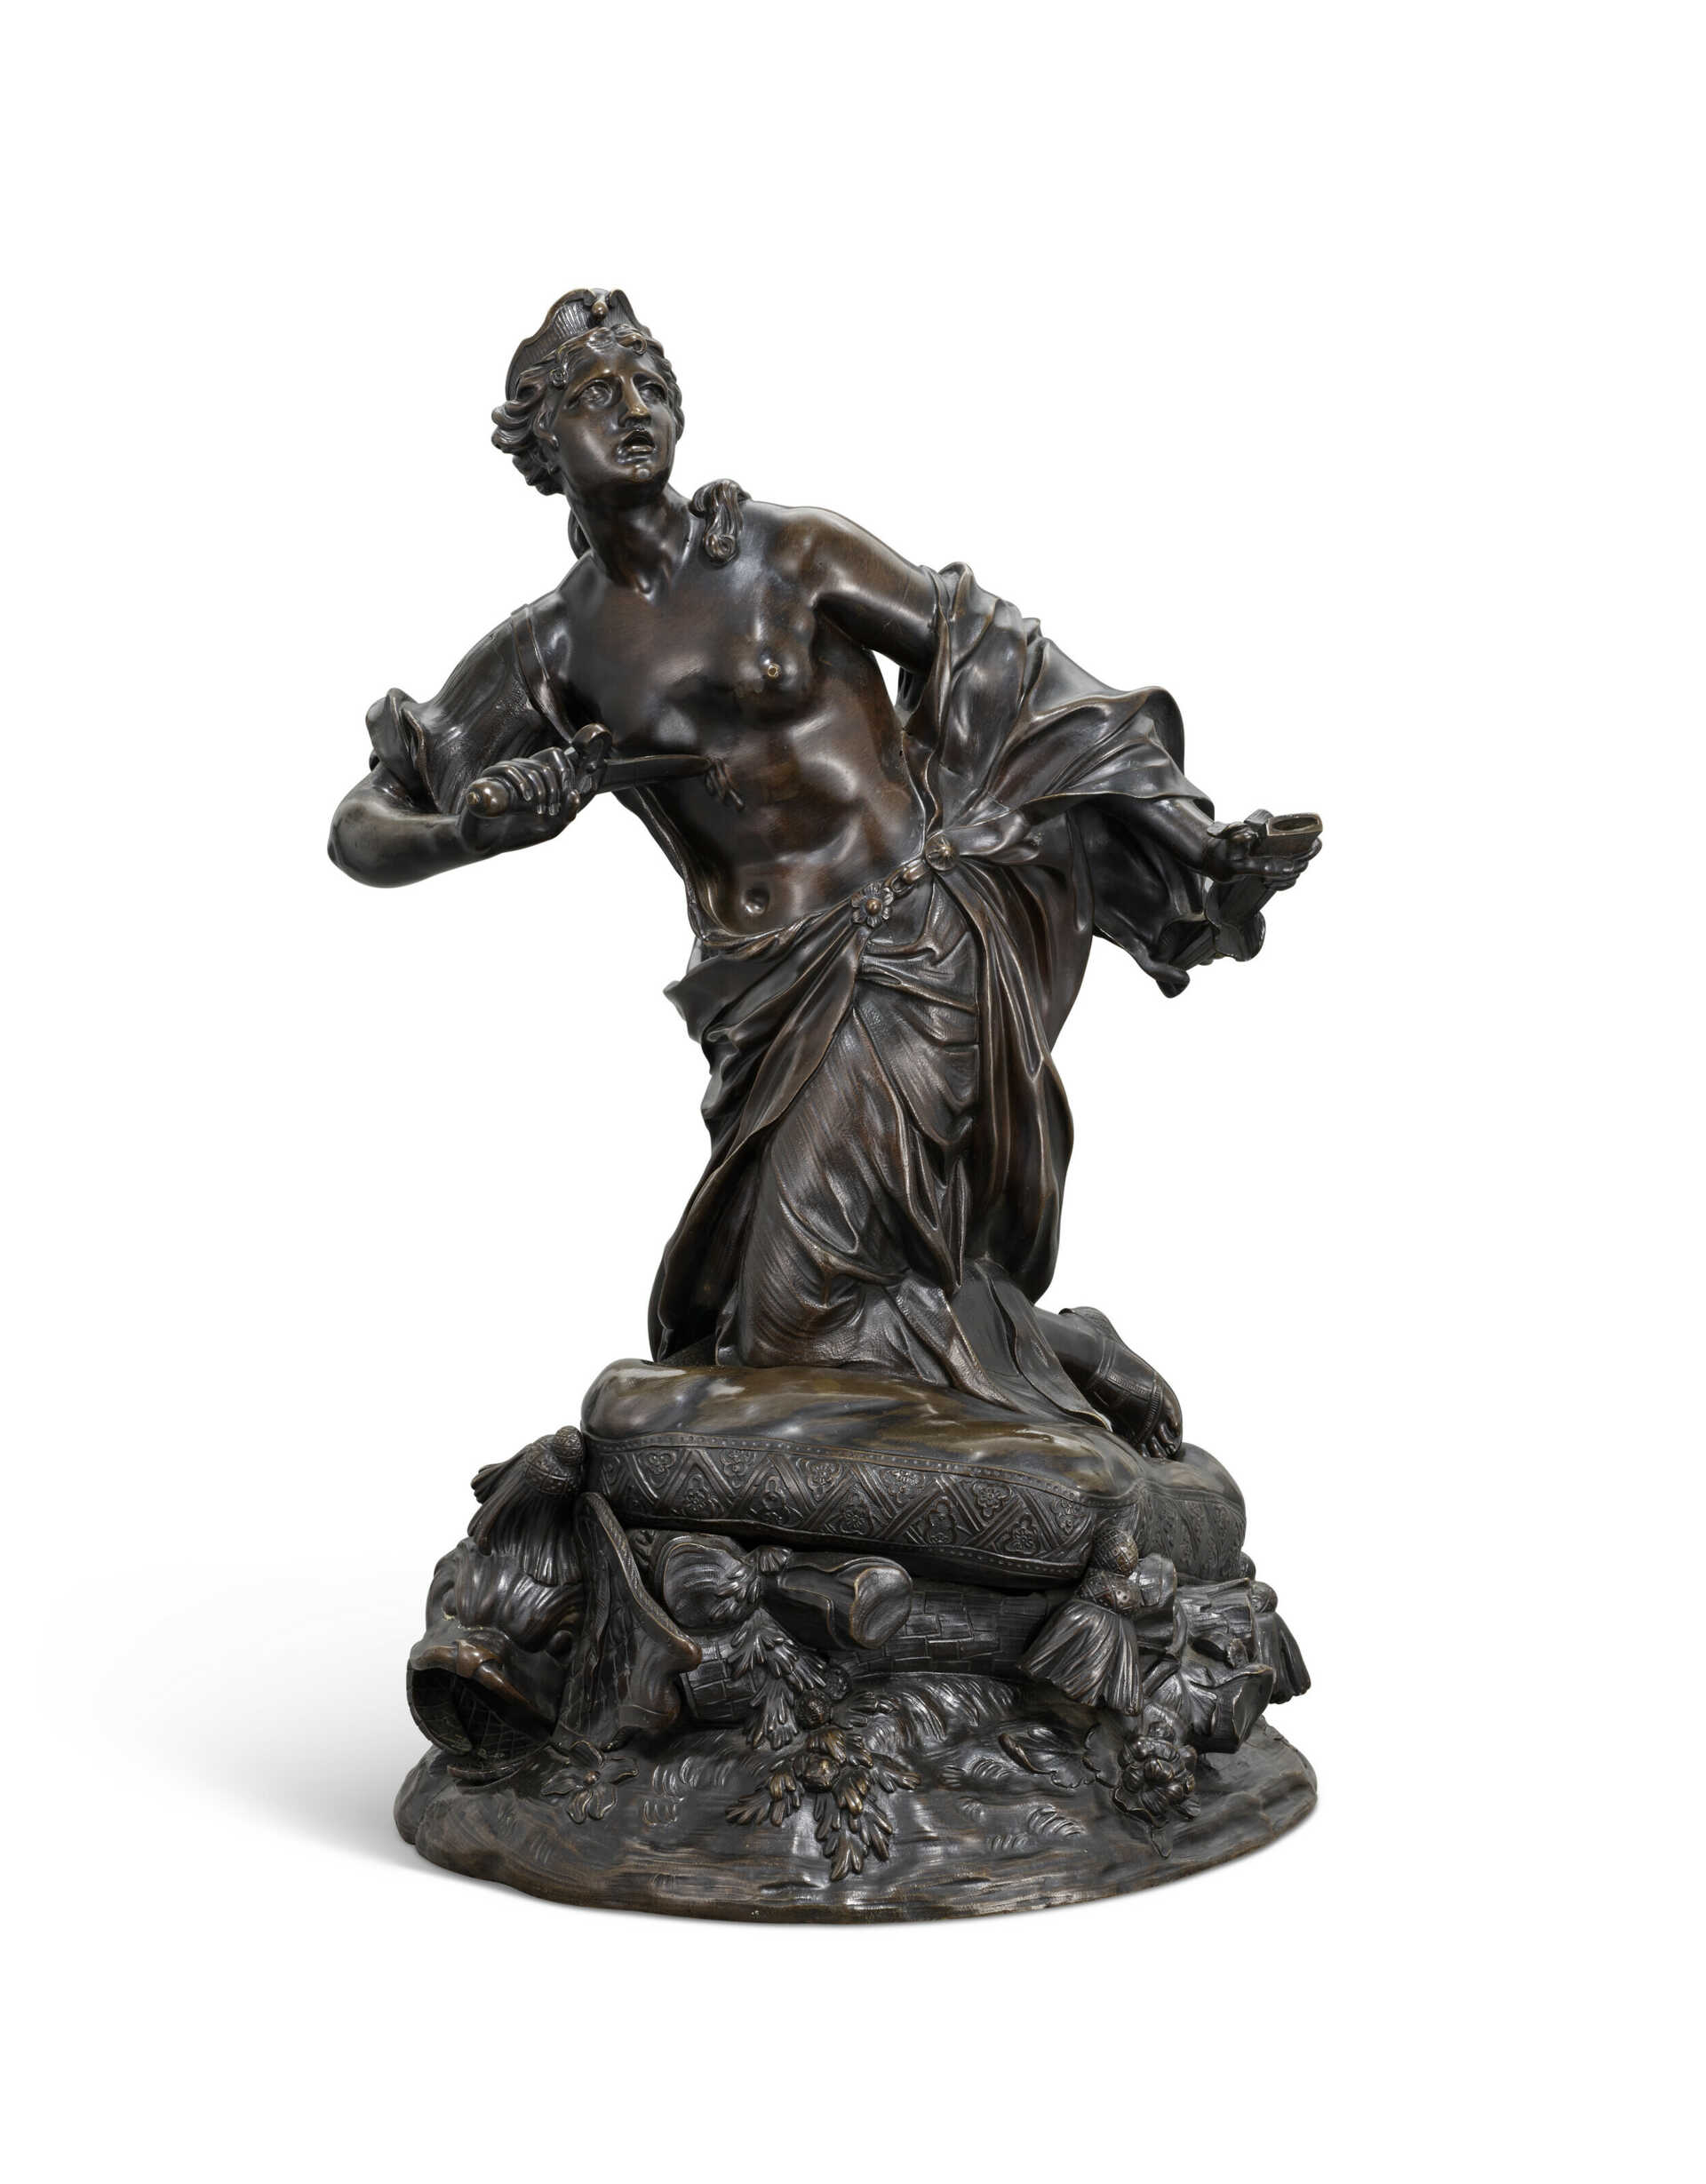 AFTER CLAUDE-AUGUSTIN CAYOT (1667-1772), FRENCH, FIRST HALF 18TH CENTURY